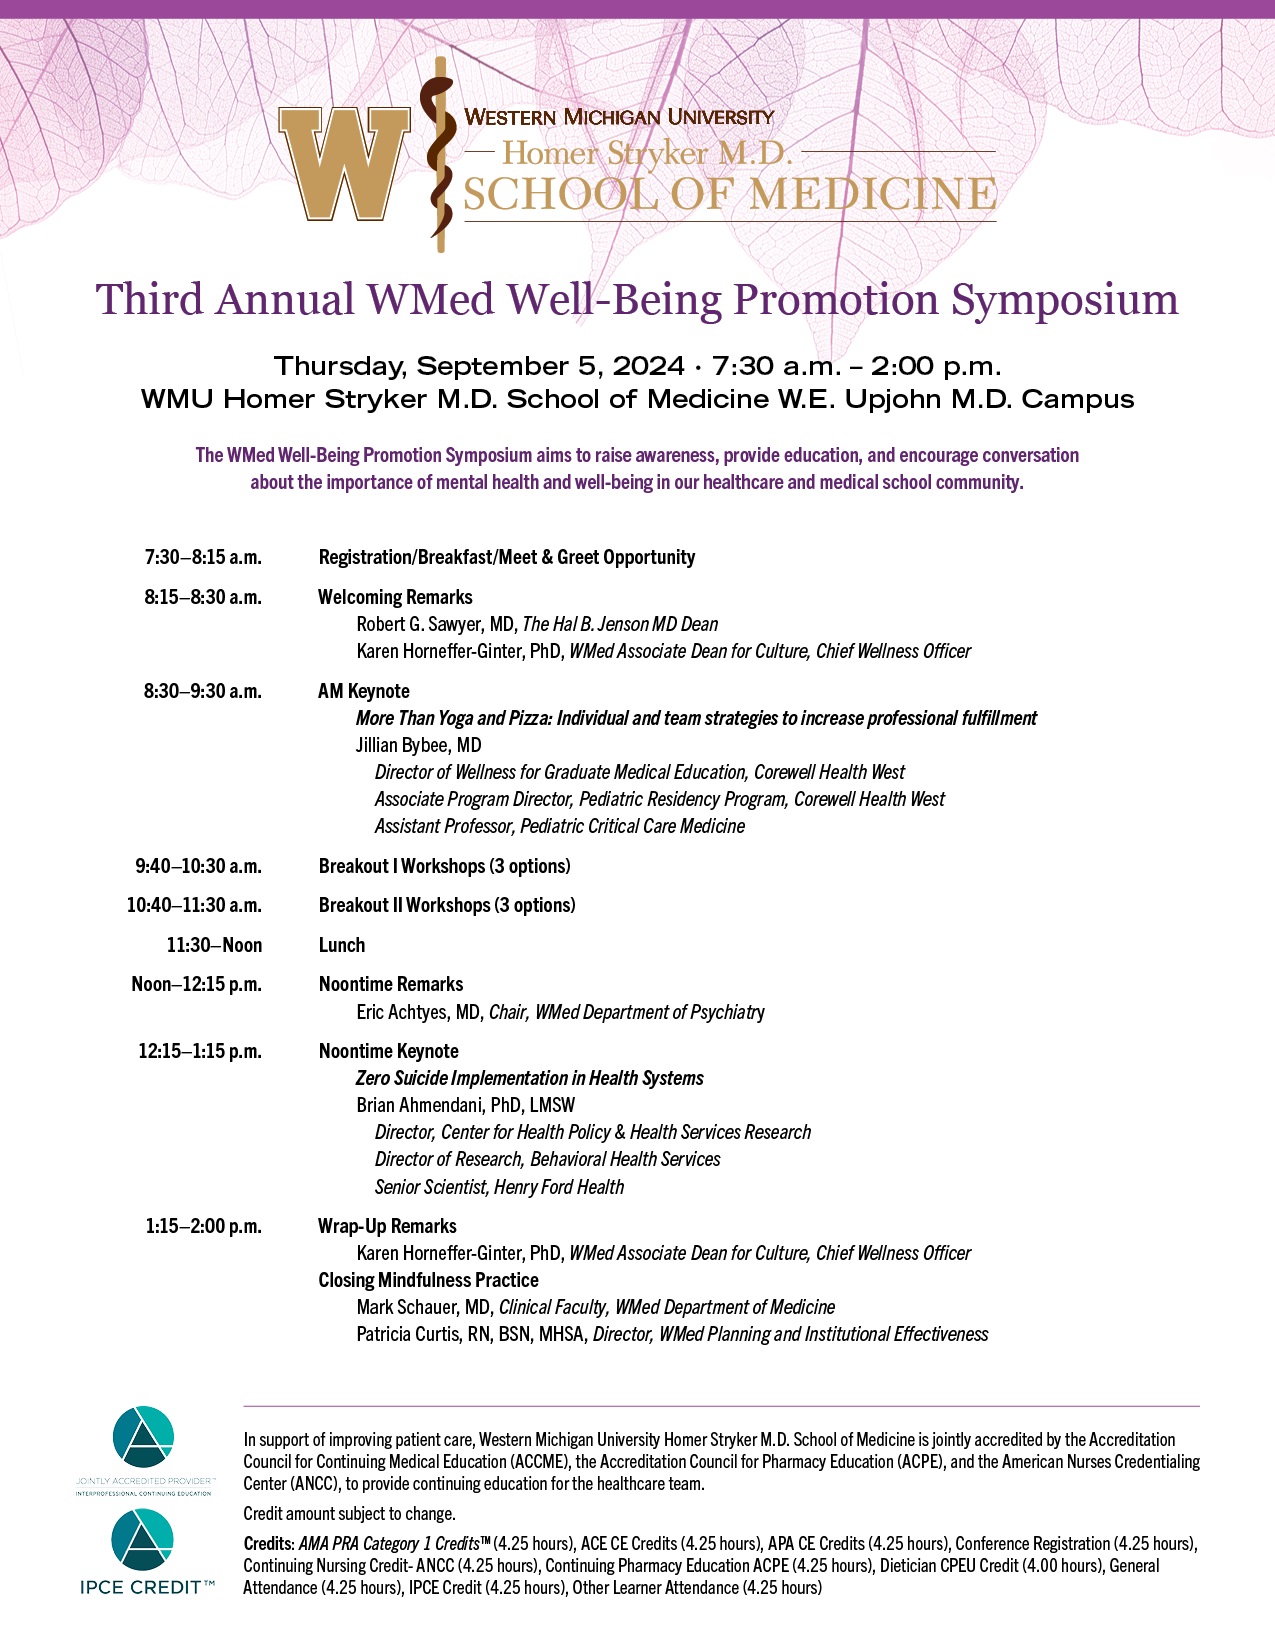 Third Annual WMed Well-Being Promotion Symposium Program Page 1